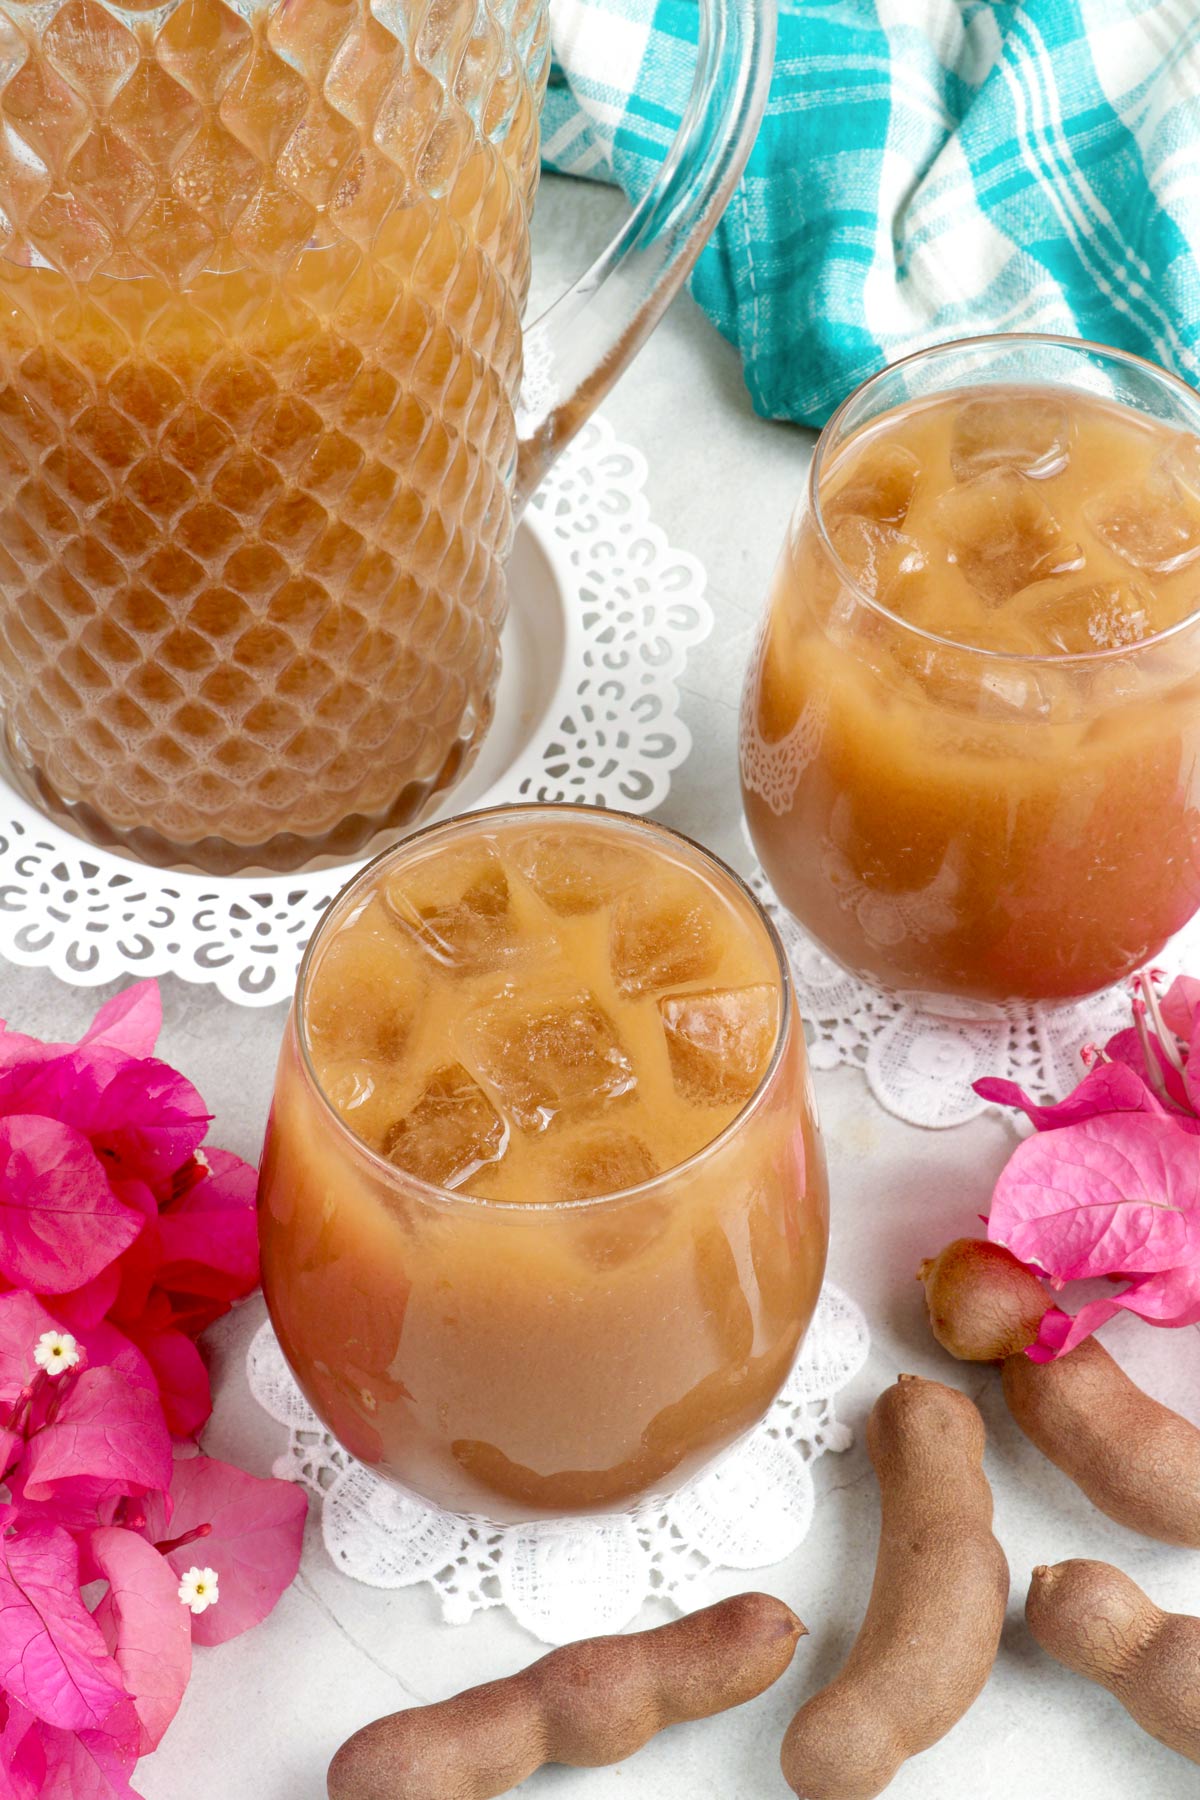 Sweet and tangy Tamarind Juice in glasses.